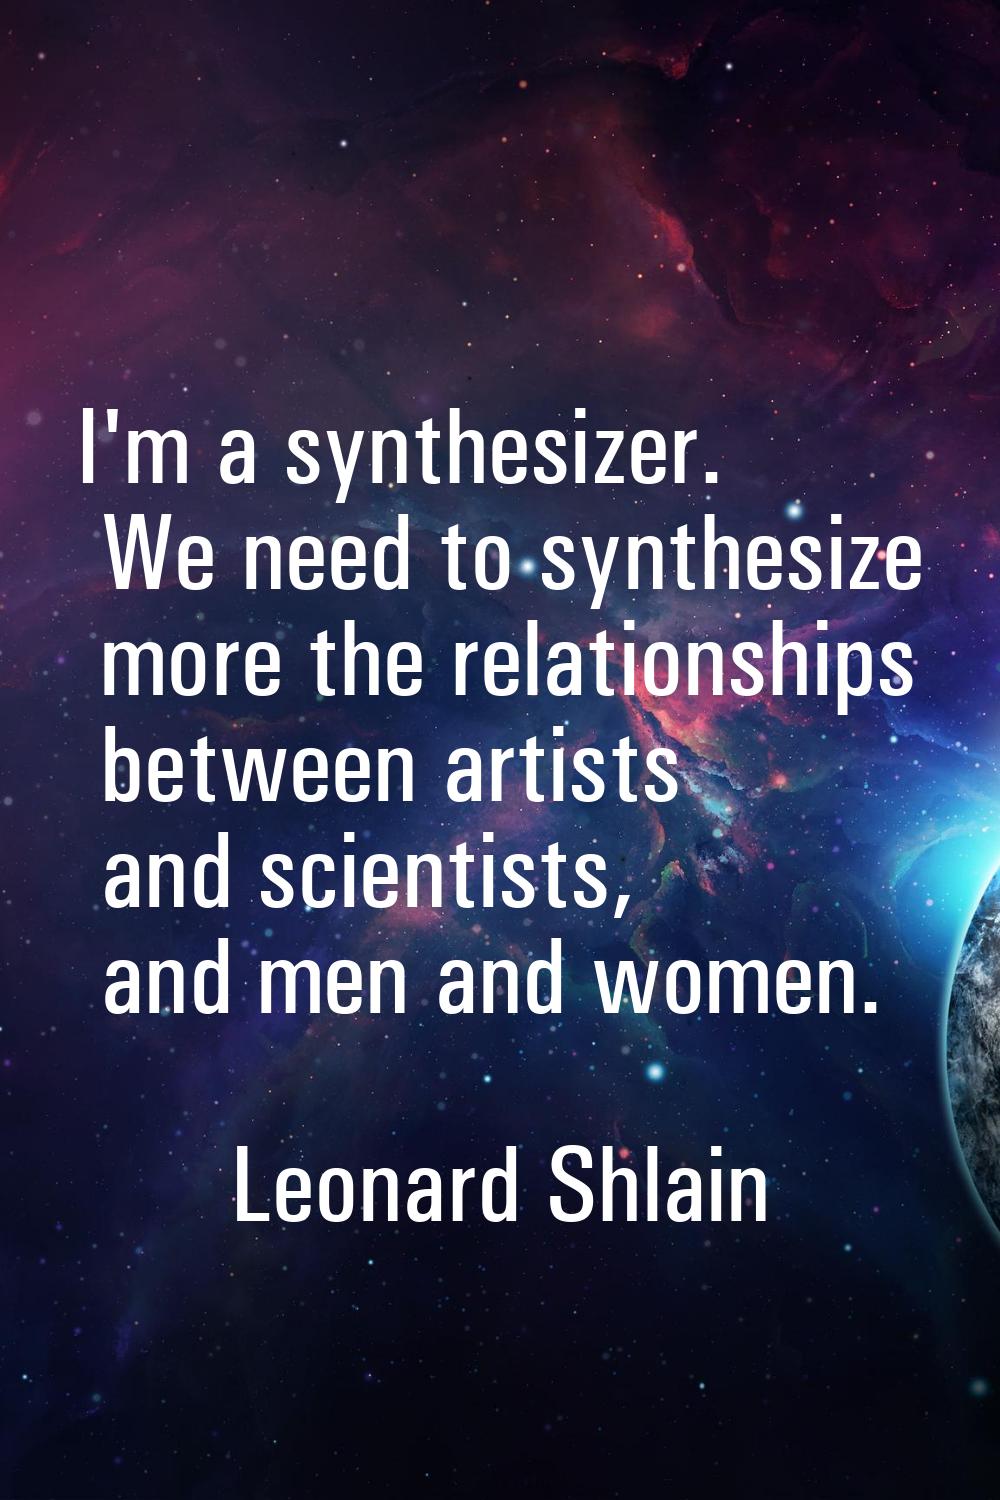 I'm a synthesizer. We need to synthesize more the relationships between artists and scientists, and